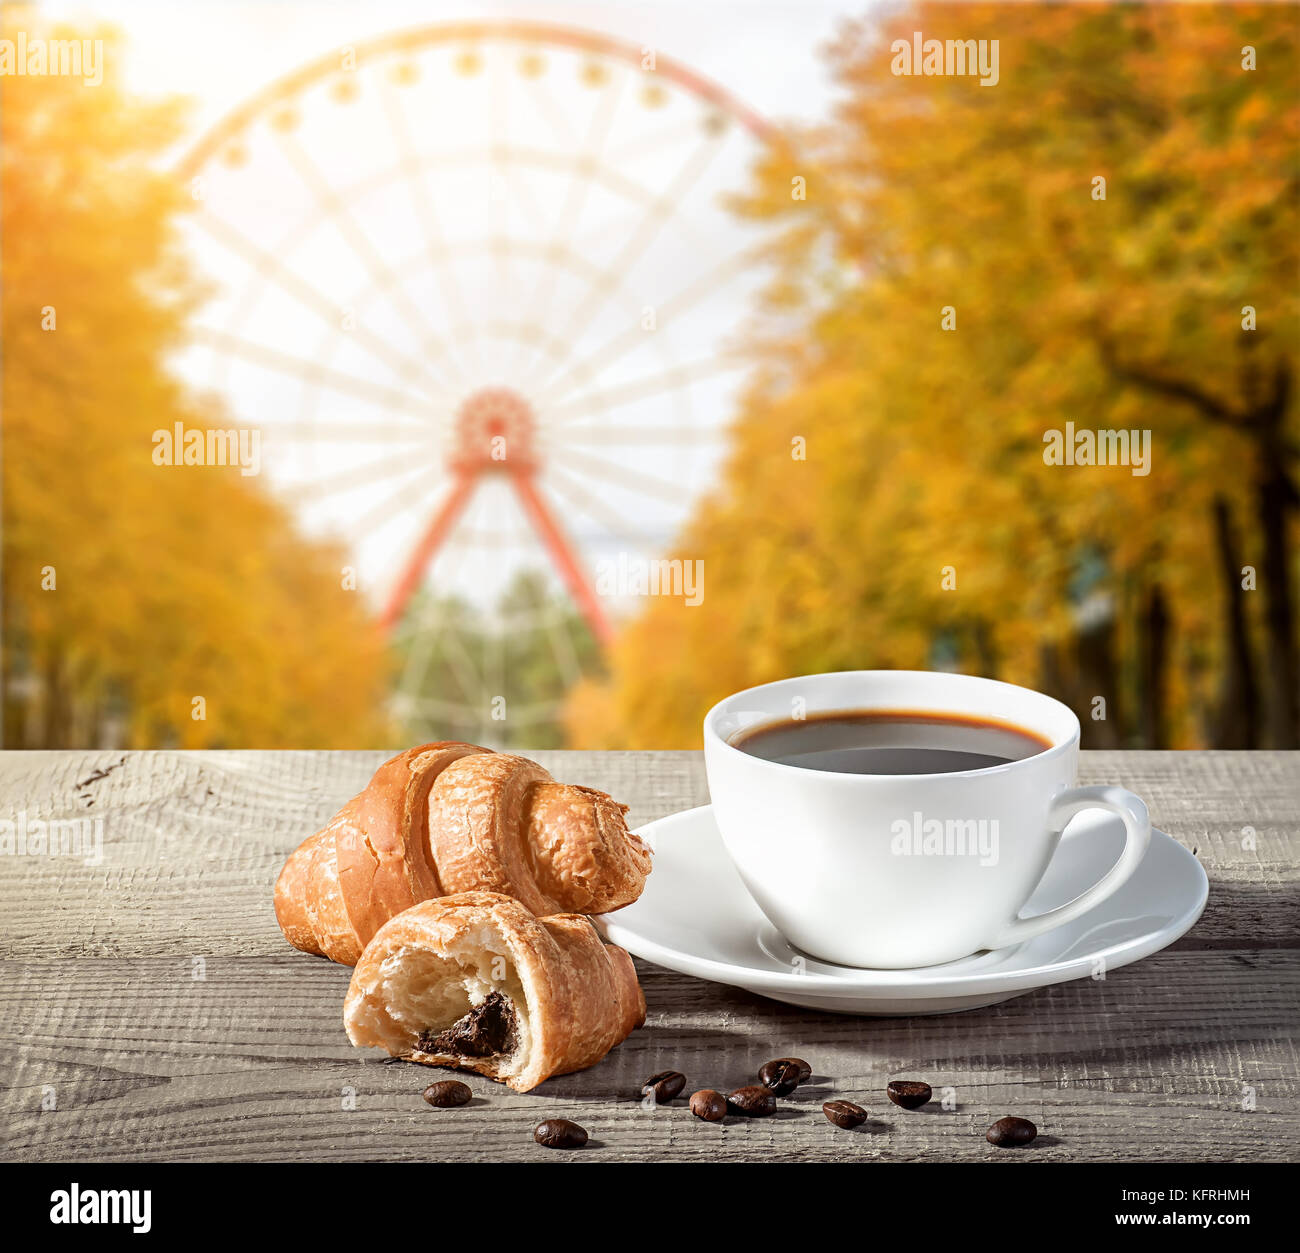 Cup of coffee with croissants Stock Photo